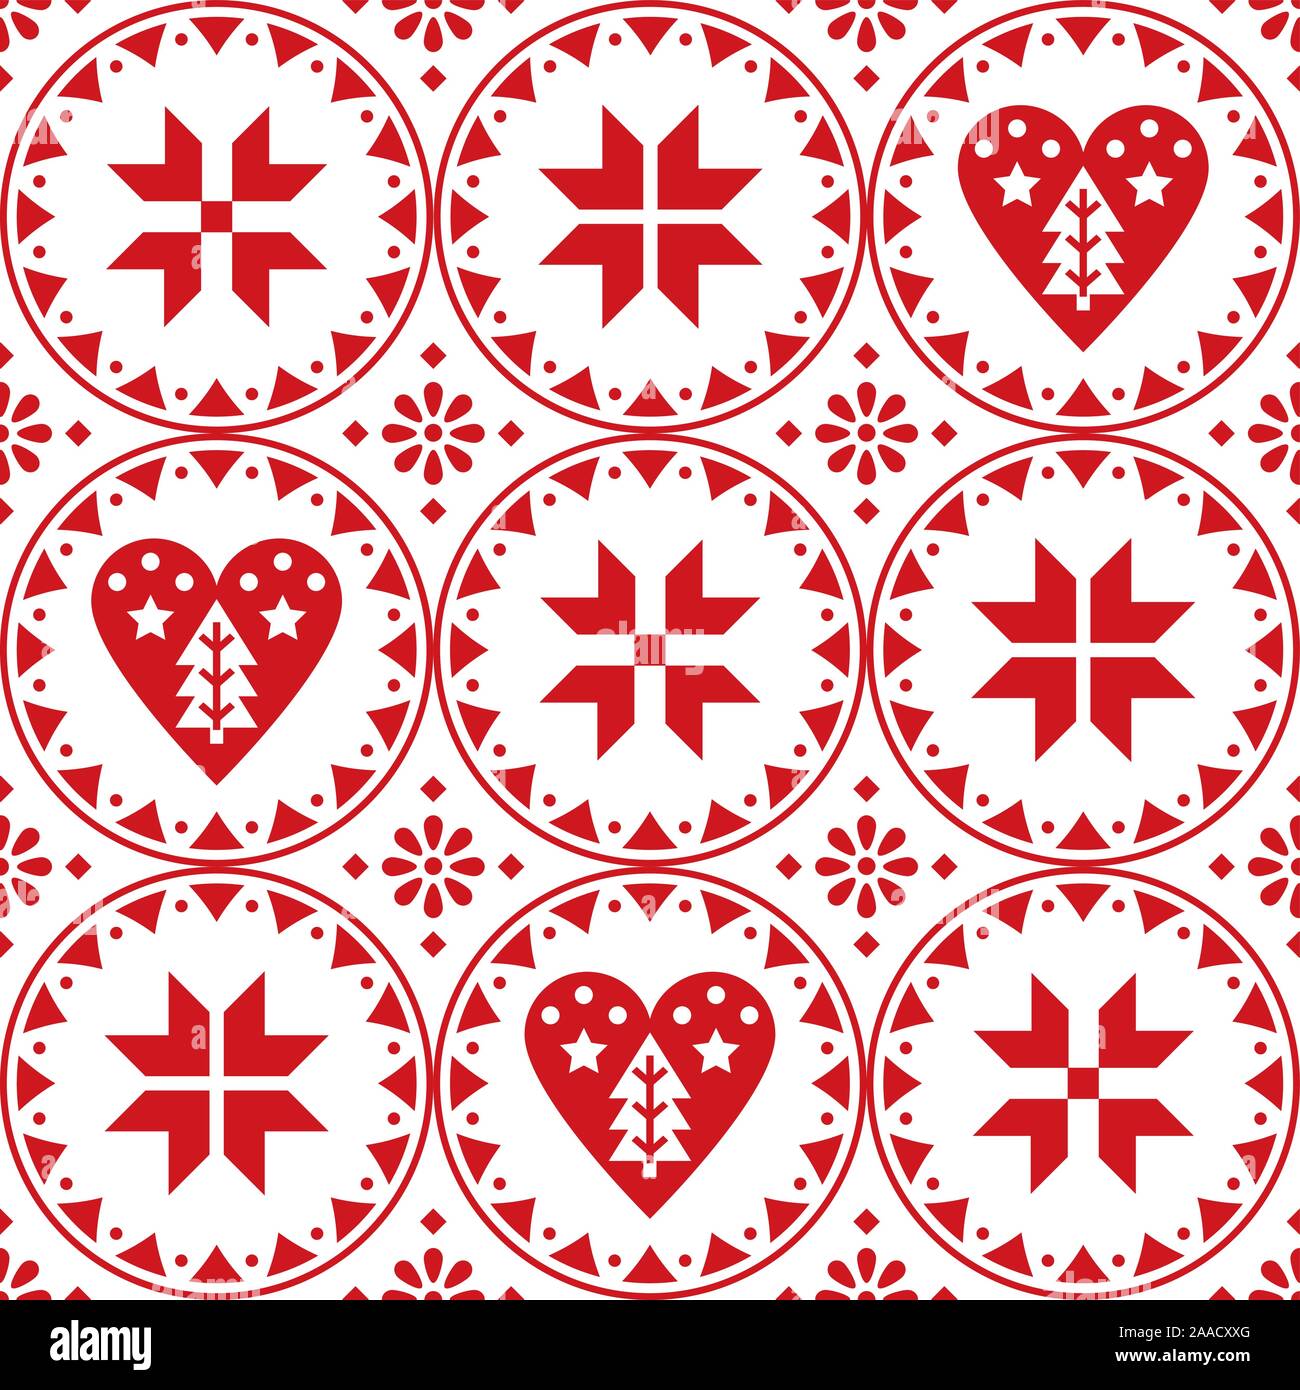 Scandinavian Christmas seamless vector pattern with snowflakes, hearts and Christmas trees - Nordic folk art style Stock Vector